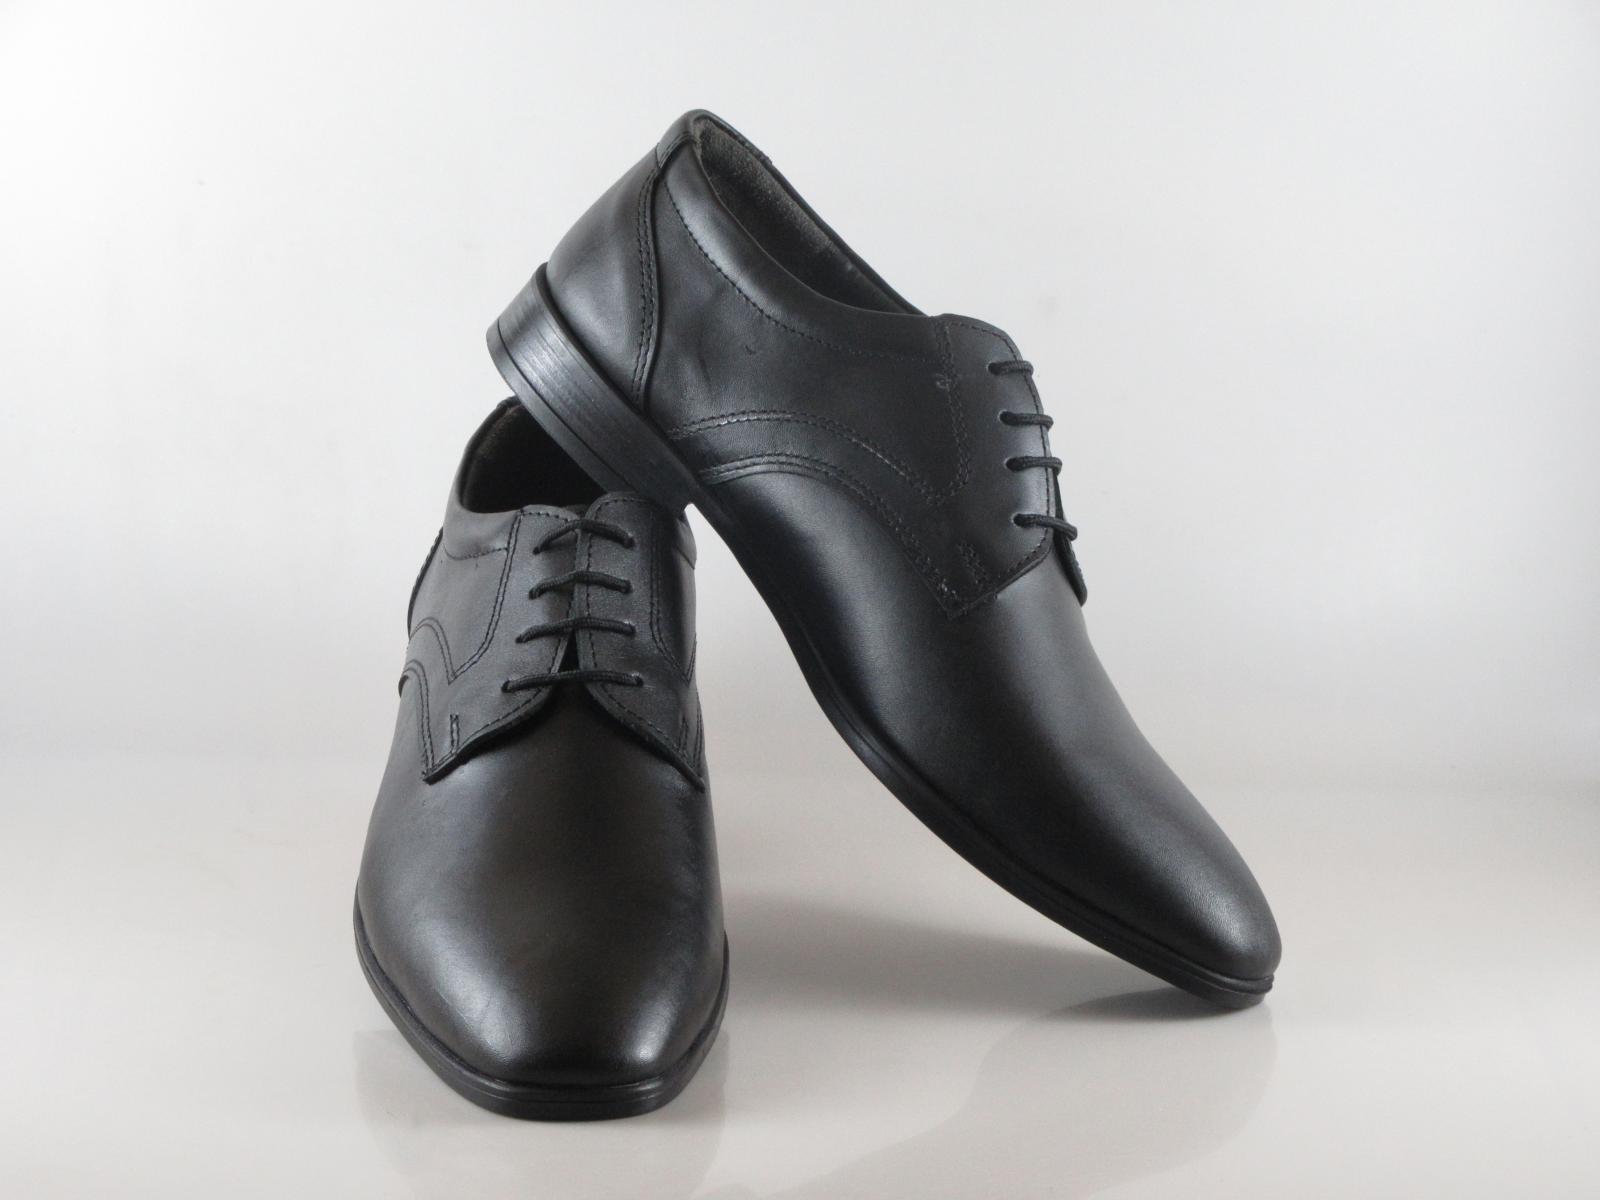 Formal Black Leather Shoes - 3381 - Leather Collections On Frostfreak.com